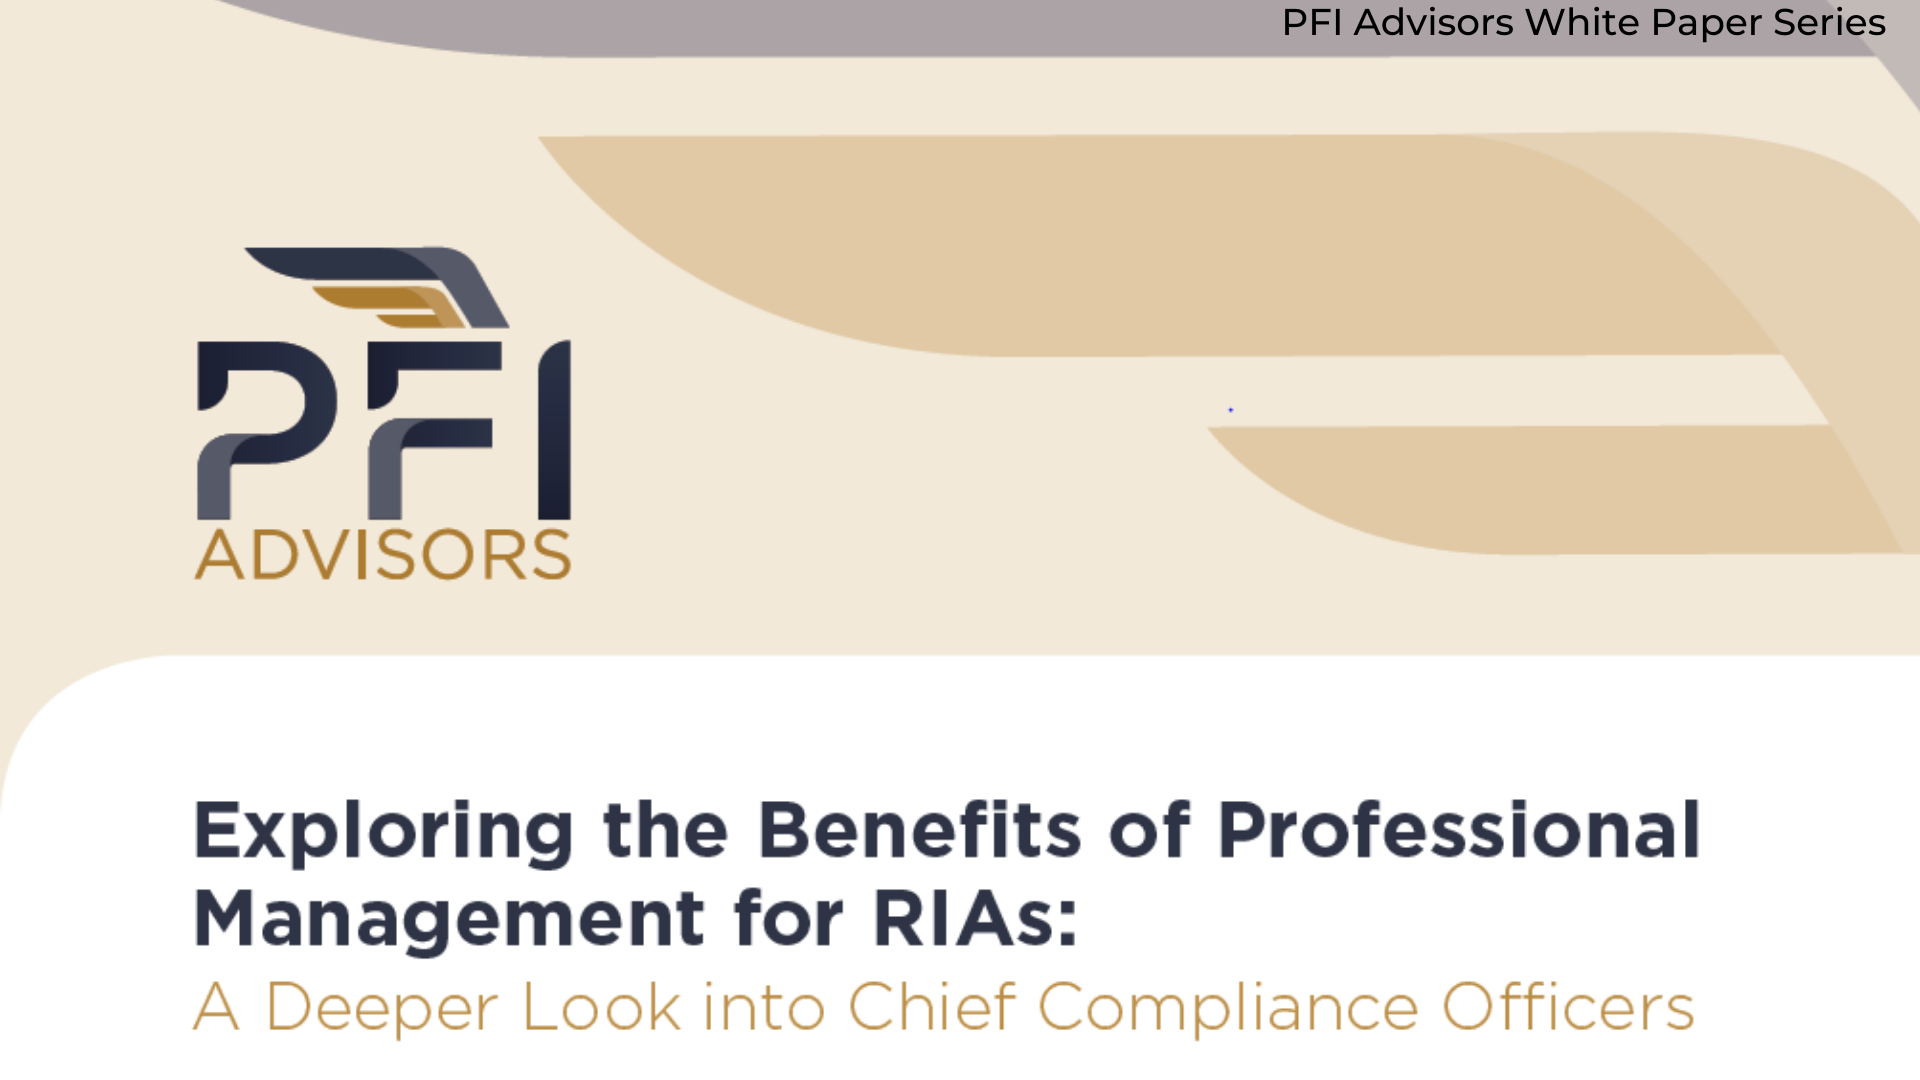 A Deeper Look Into The Role of  Chief Compliance Officers at RIAs